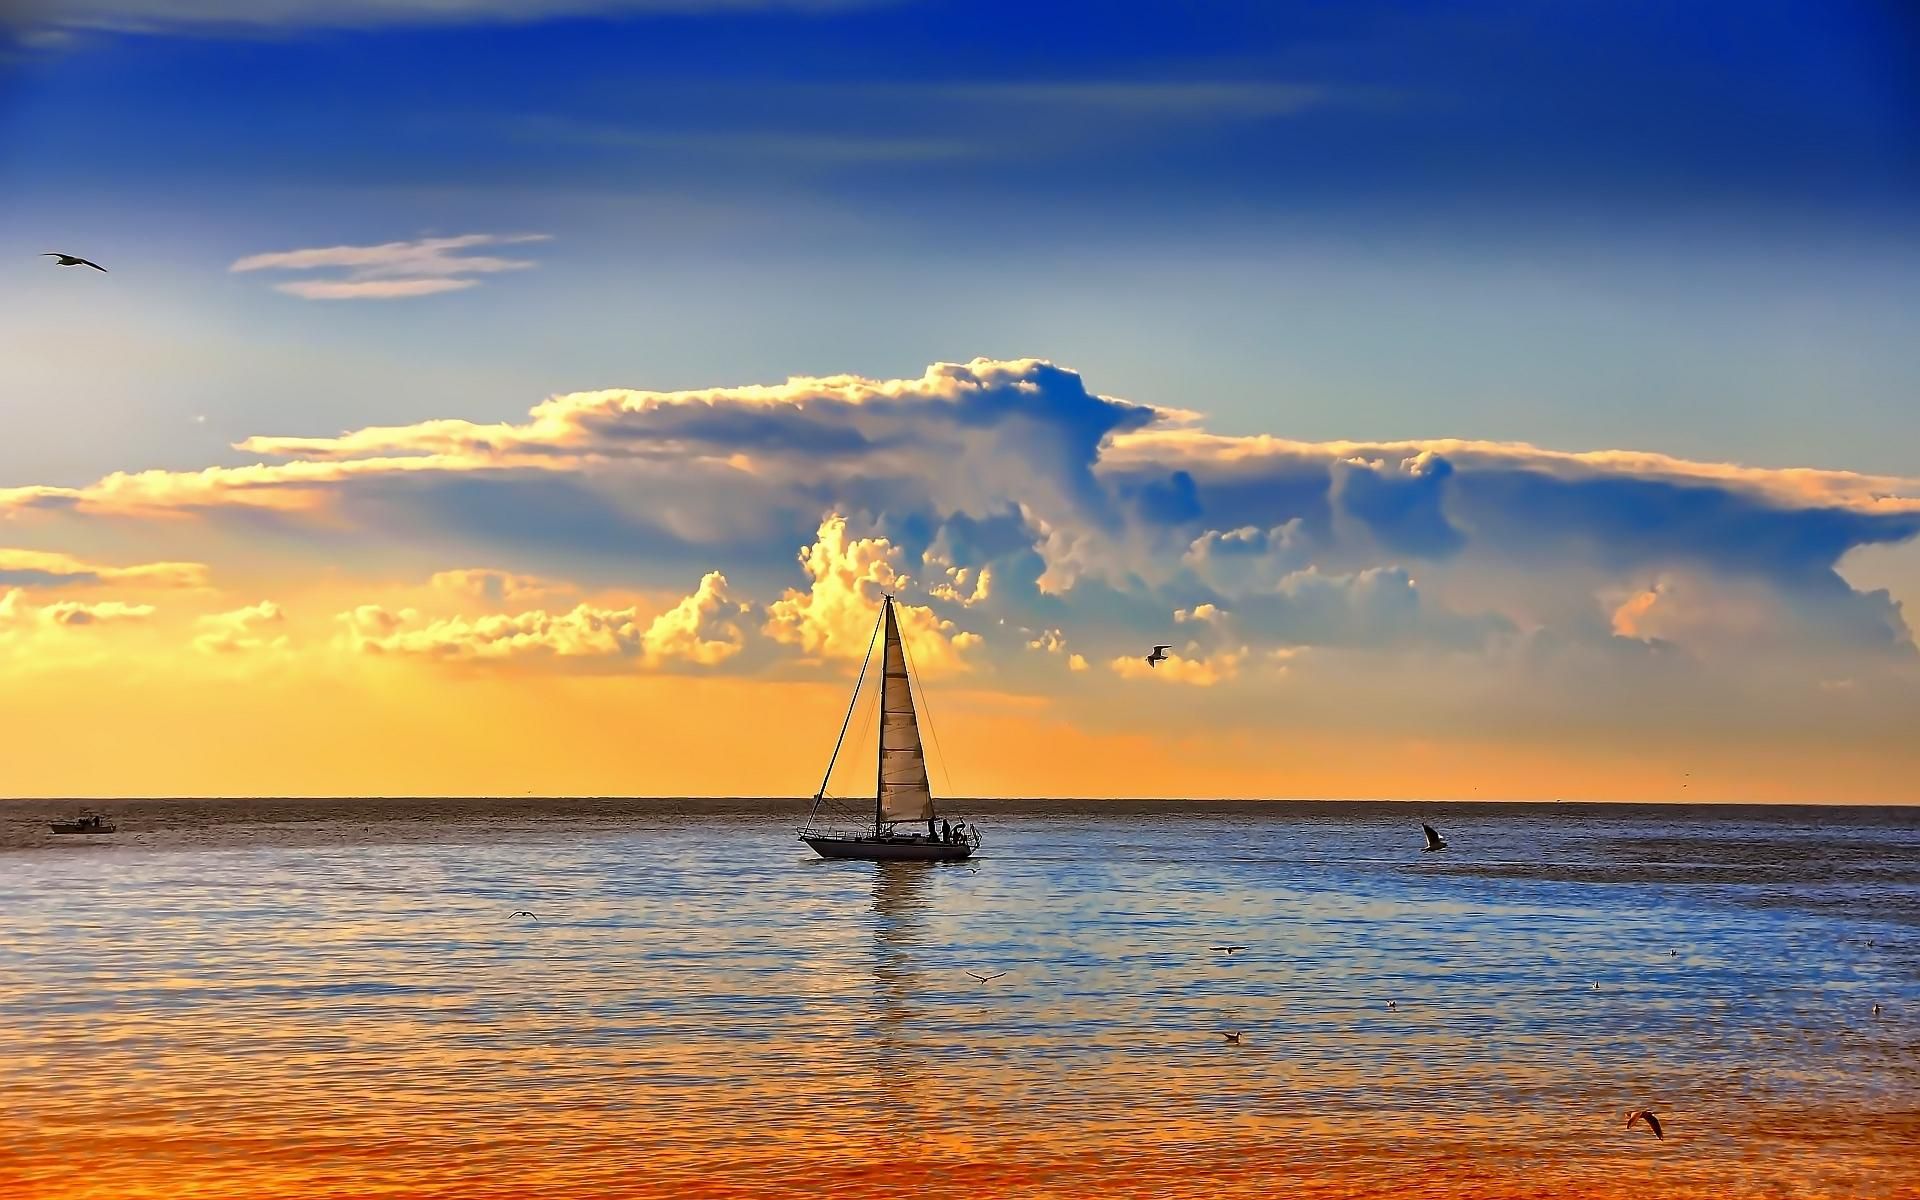 Sailboat In The Sea At Sunset Wallpaper - Природа Кыргызстана Иссык Куль , HD Wallpaper & Backgrounds